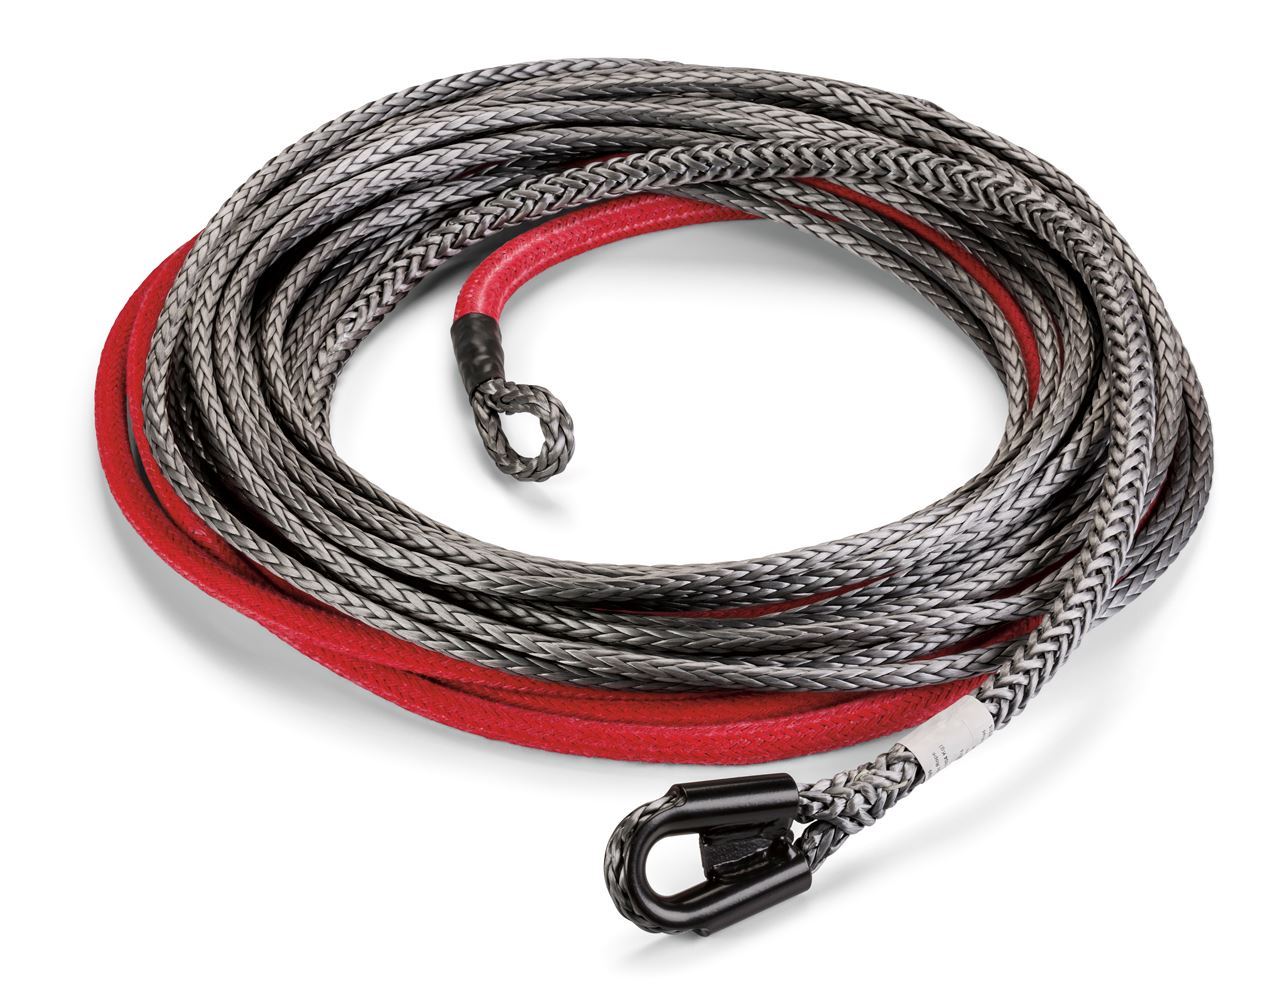 Race-Driven Heavy Duty 50' Replacement Winch Rope Line Cable 3500 LB Capacity 